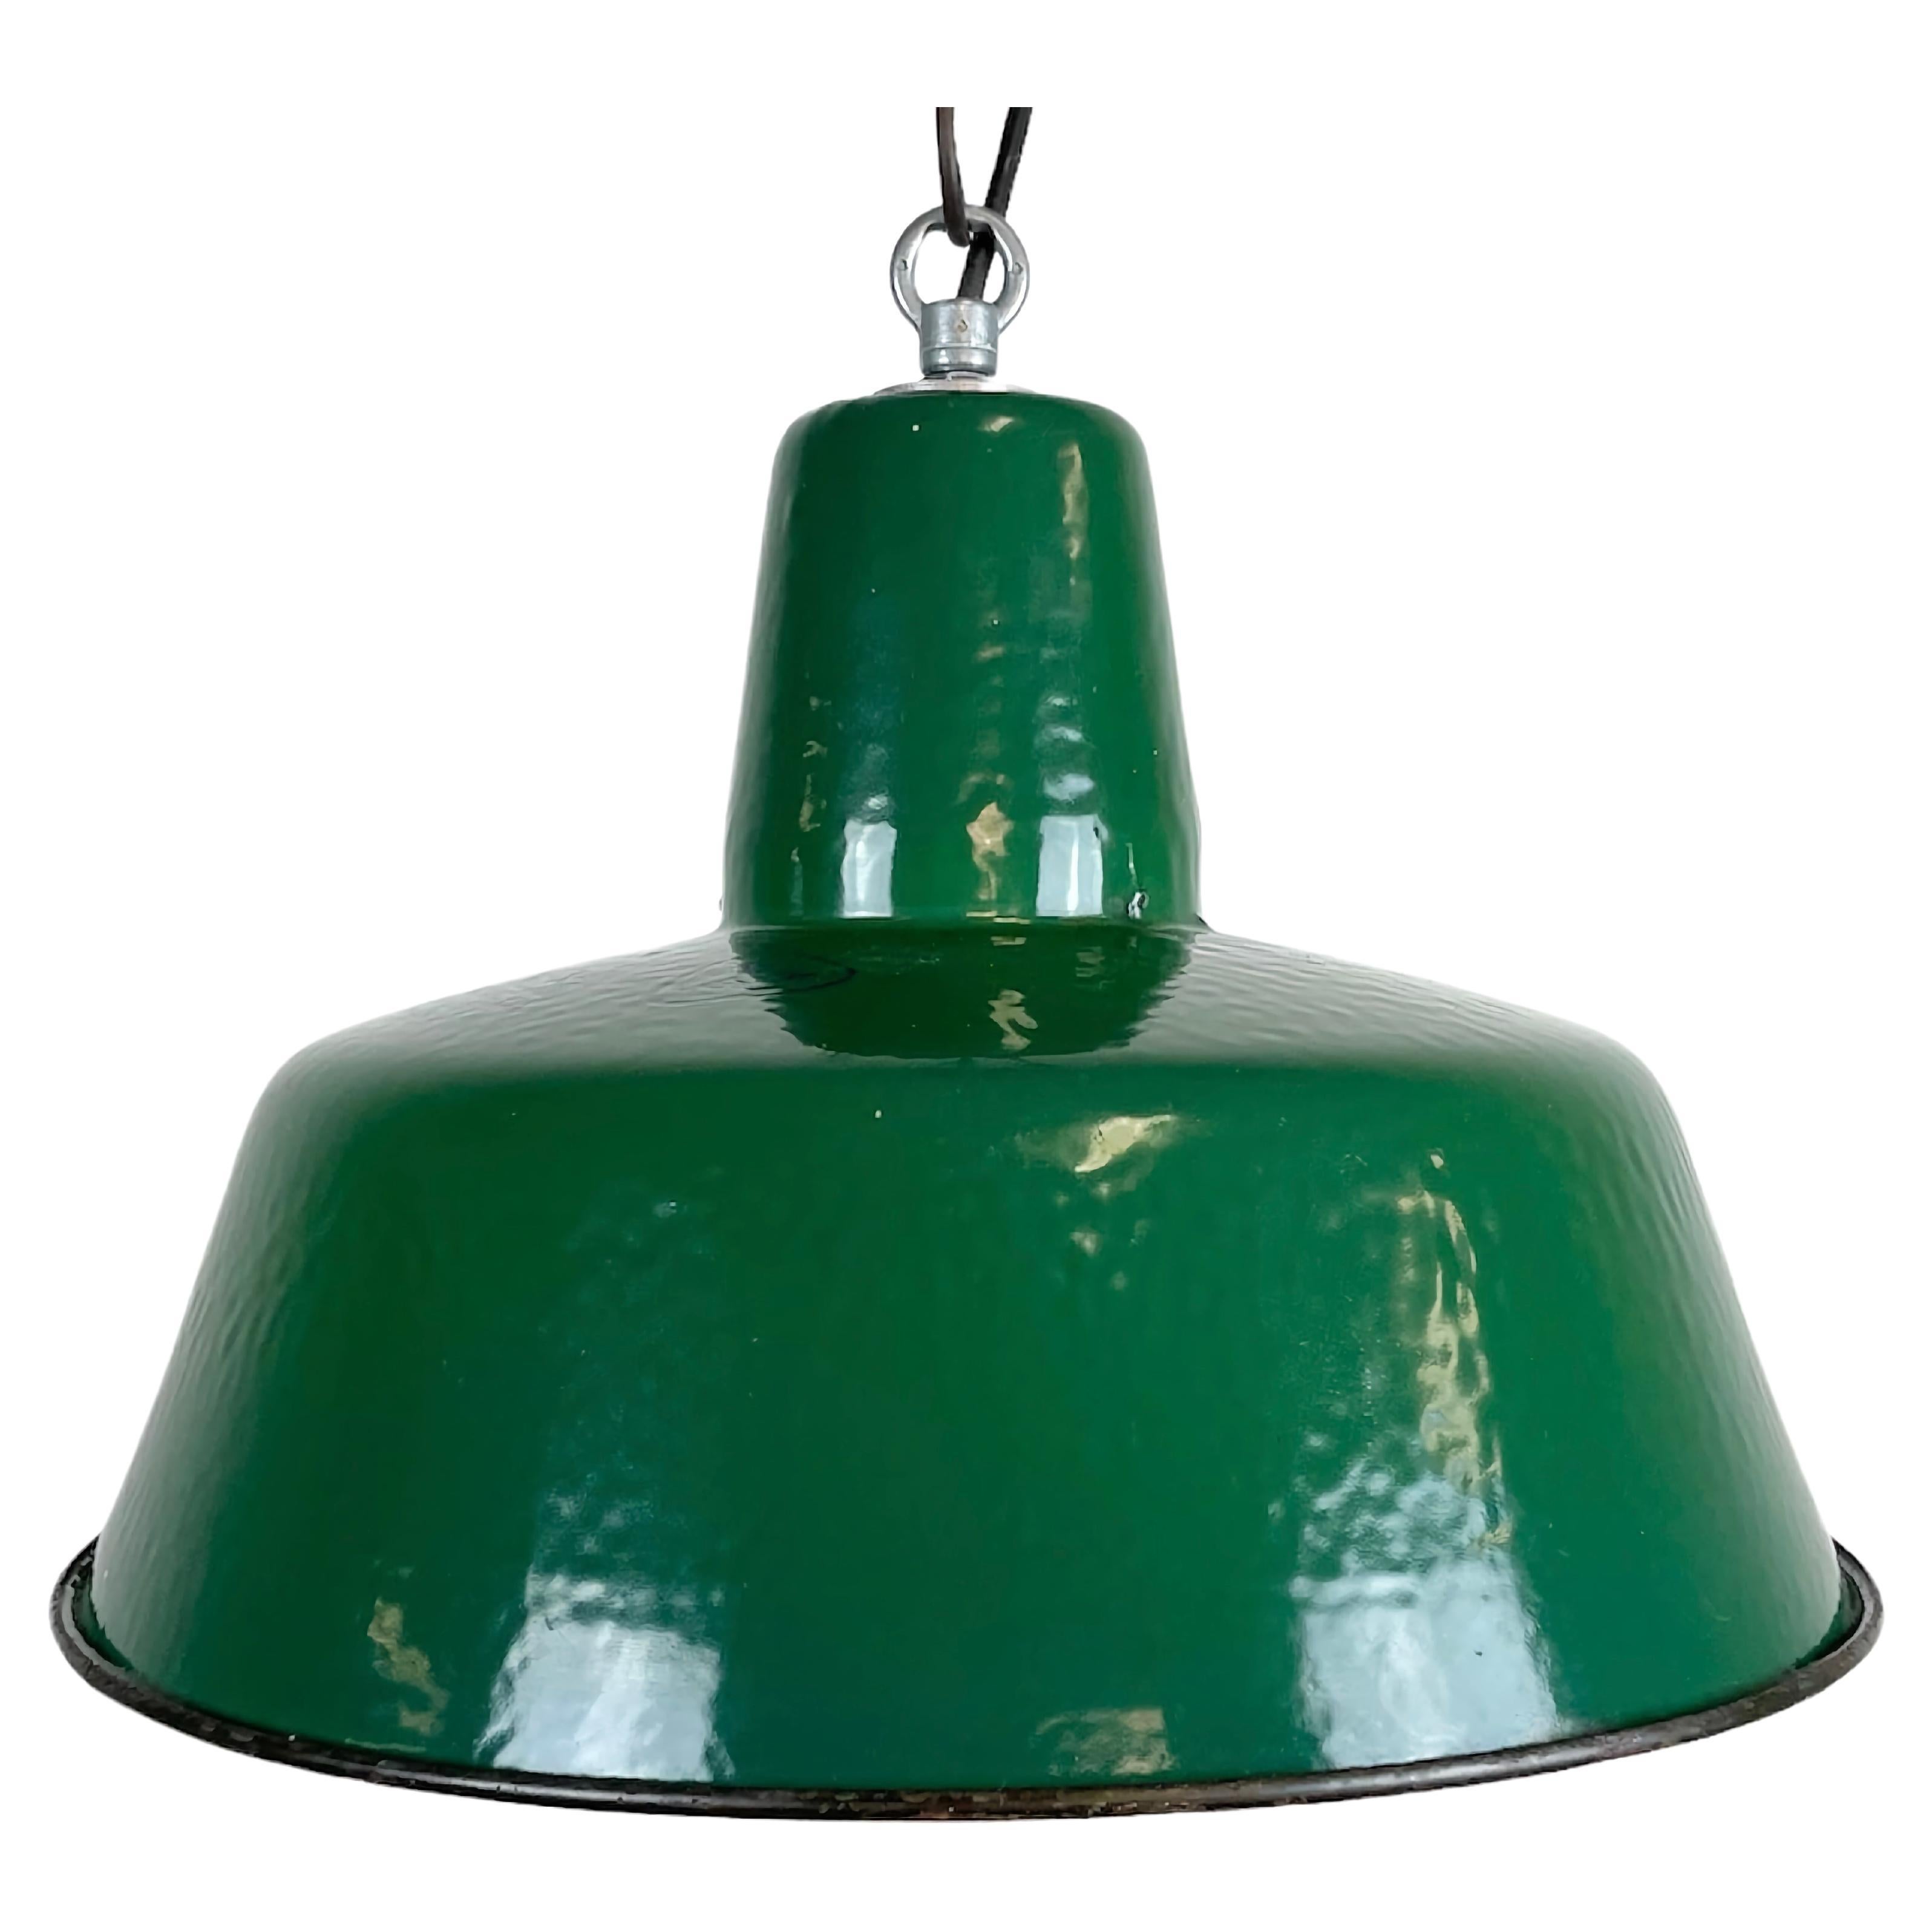 Industrial green enamel pendant light made by Polam Wilkasy in Poland during the 1960s. White enamel inside the shade. Iron top. The porcelain socket requires E 27 light bulbs. New wire. Fully functional. The weight of the lamp is 1,2 kg.